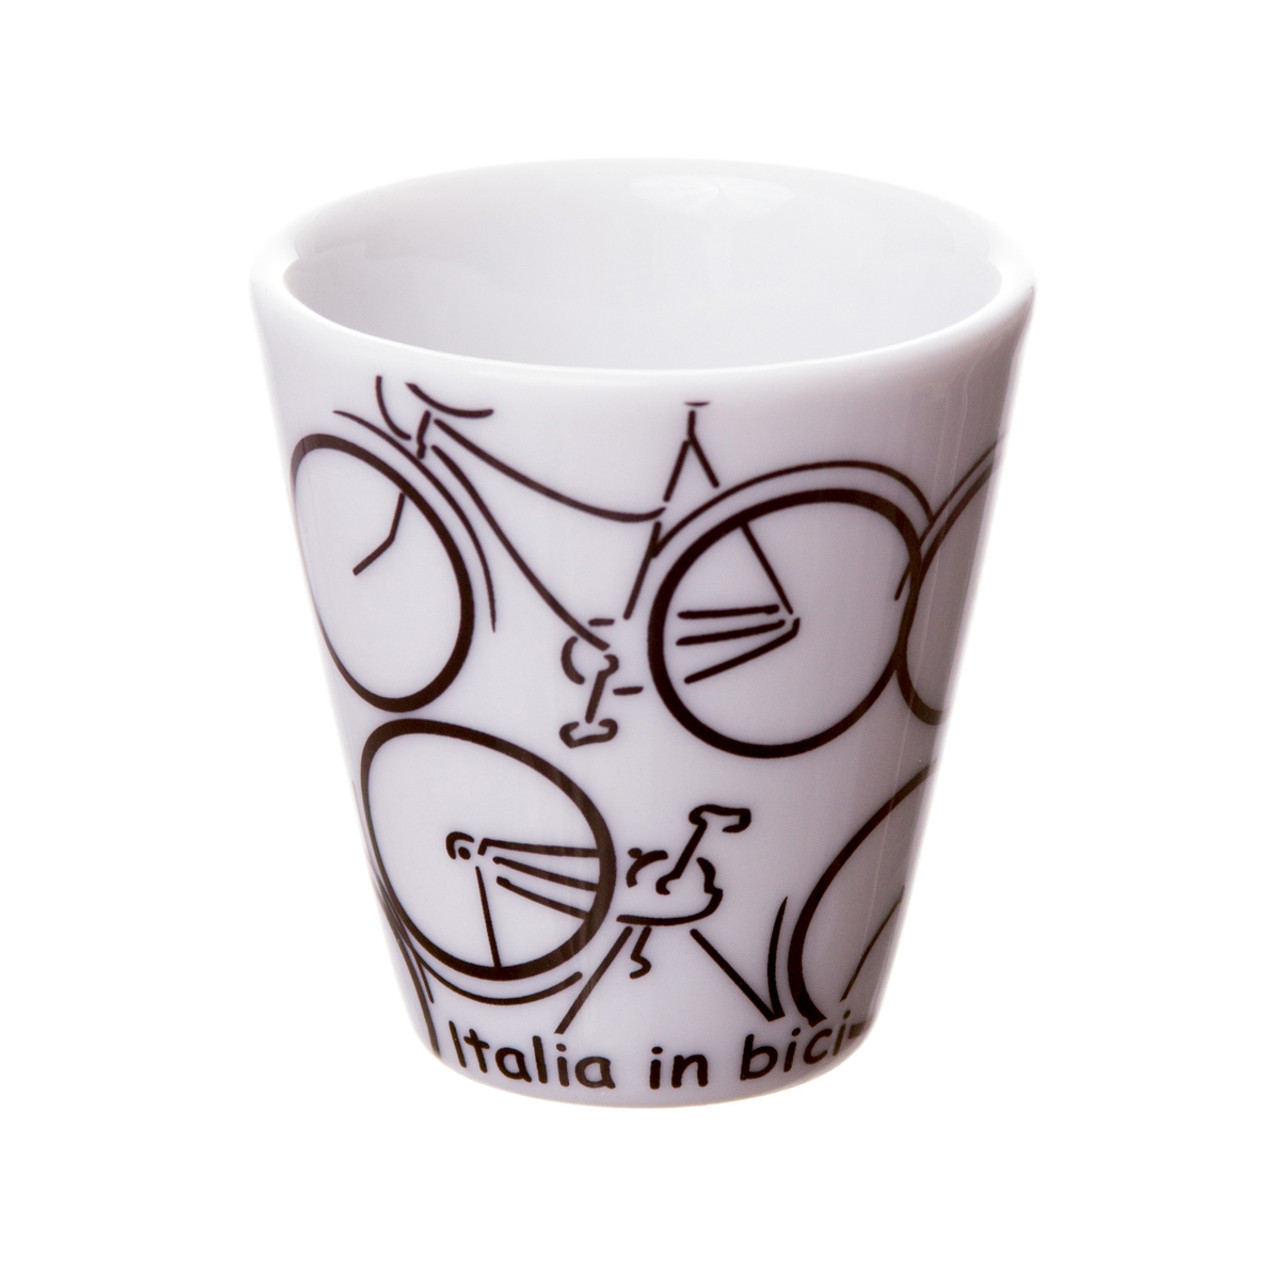 https://cdn11.bigcommerce.com/s-6h7ychjk4/images/stencil/1280x1280/products/8163/89216/italia-in-bici-espresso-cup-3-front__75235.1597181597.jpg?c=1&imbypass=on